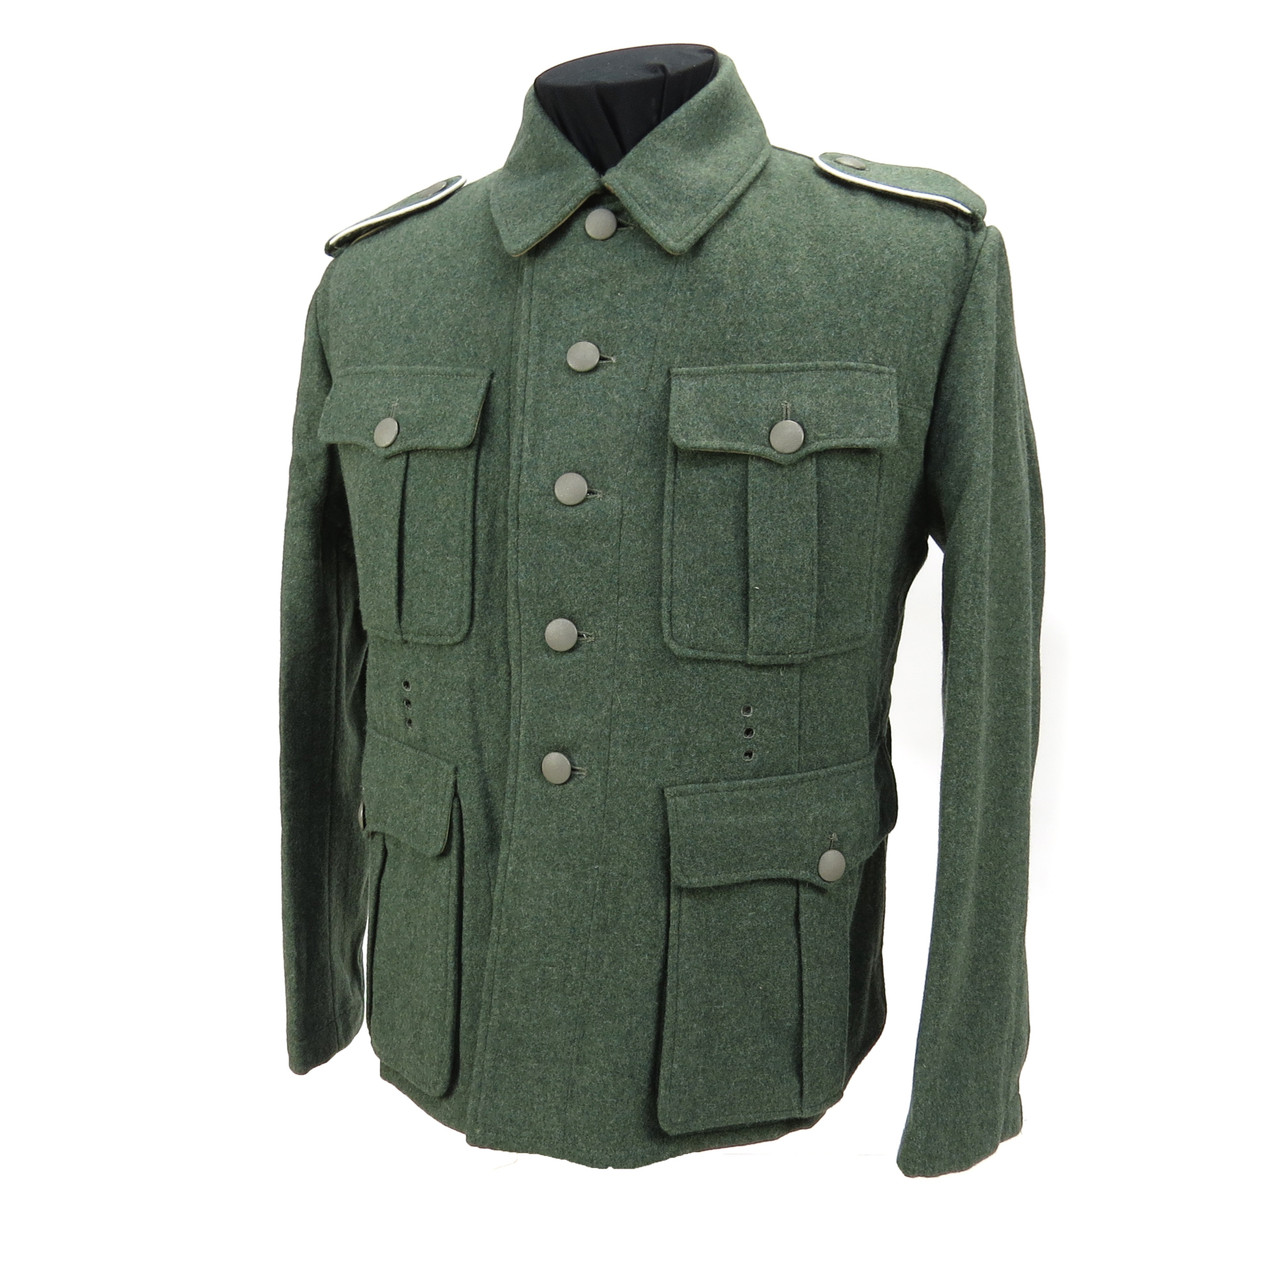 M40 Tunic from Hessen Antique